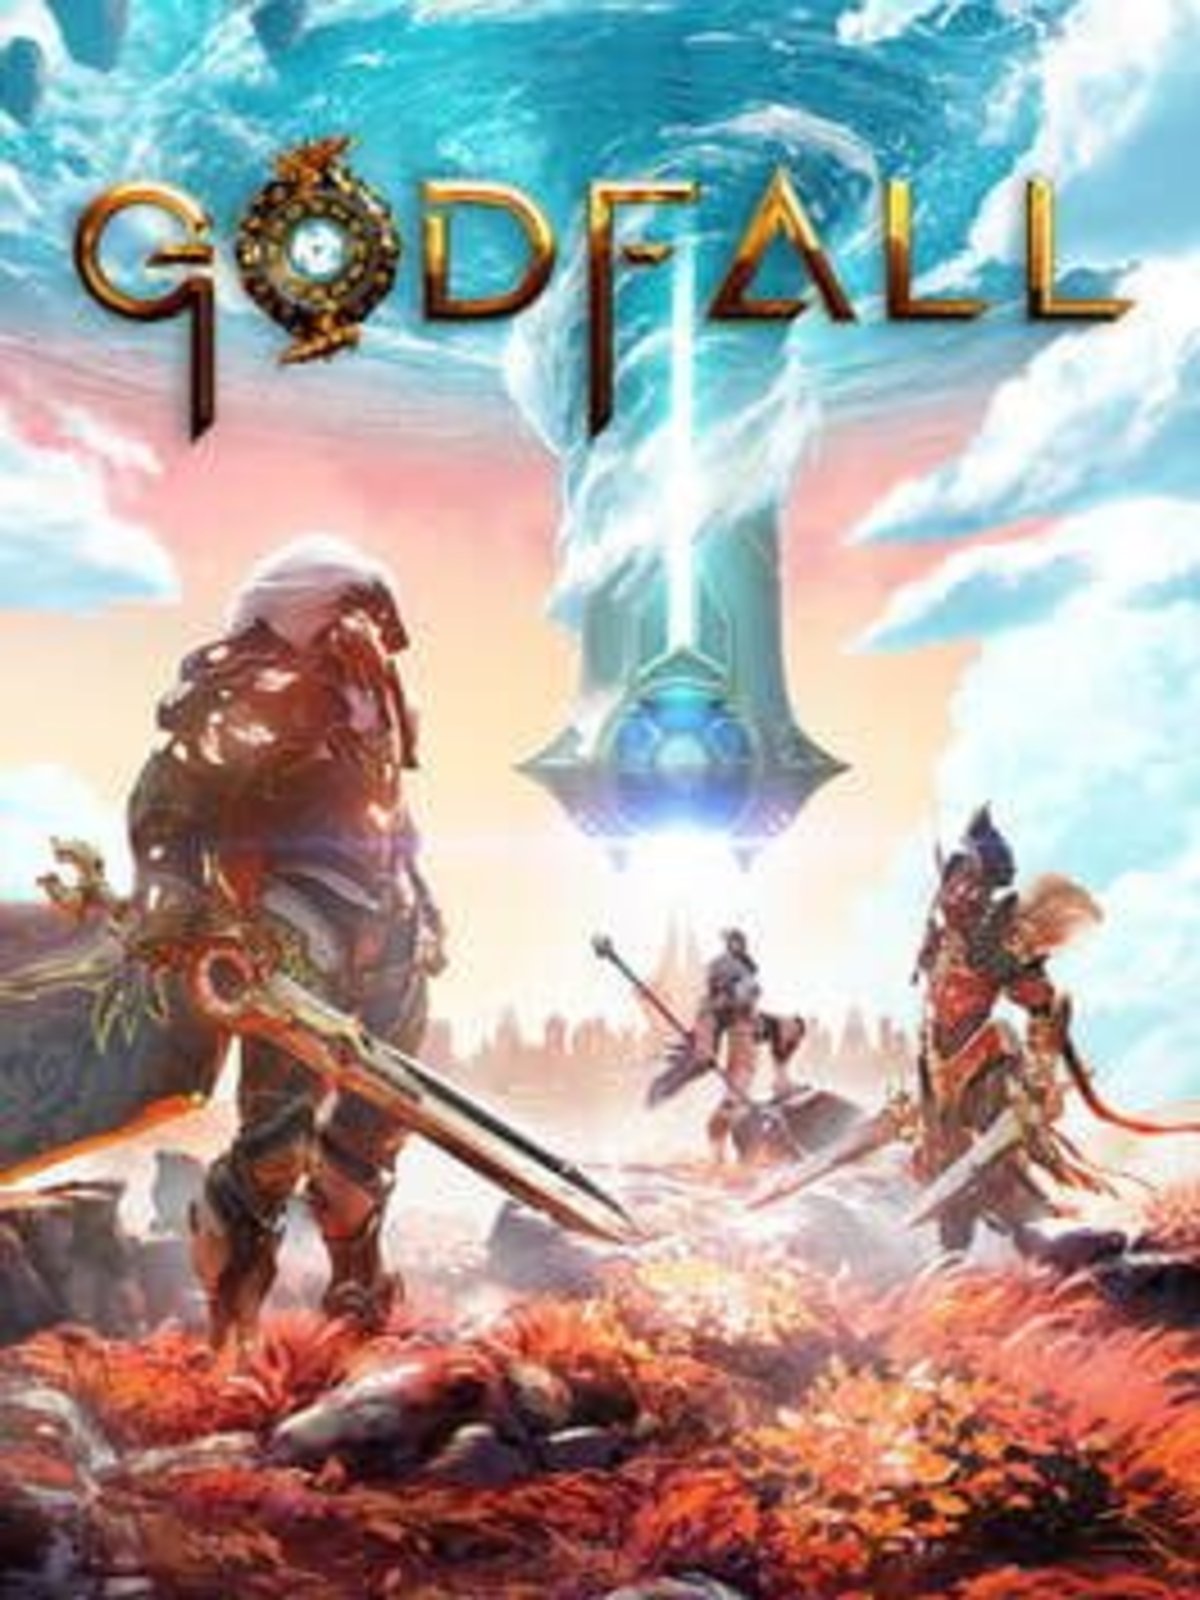 The PlayStation Plus version of Godfall generates controversy because it is not the complete game